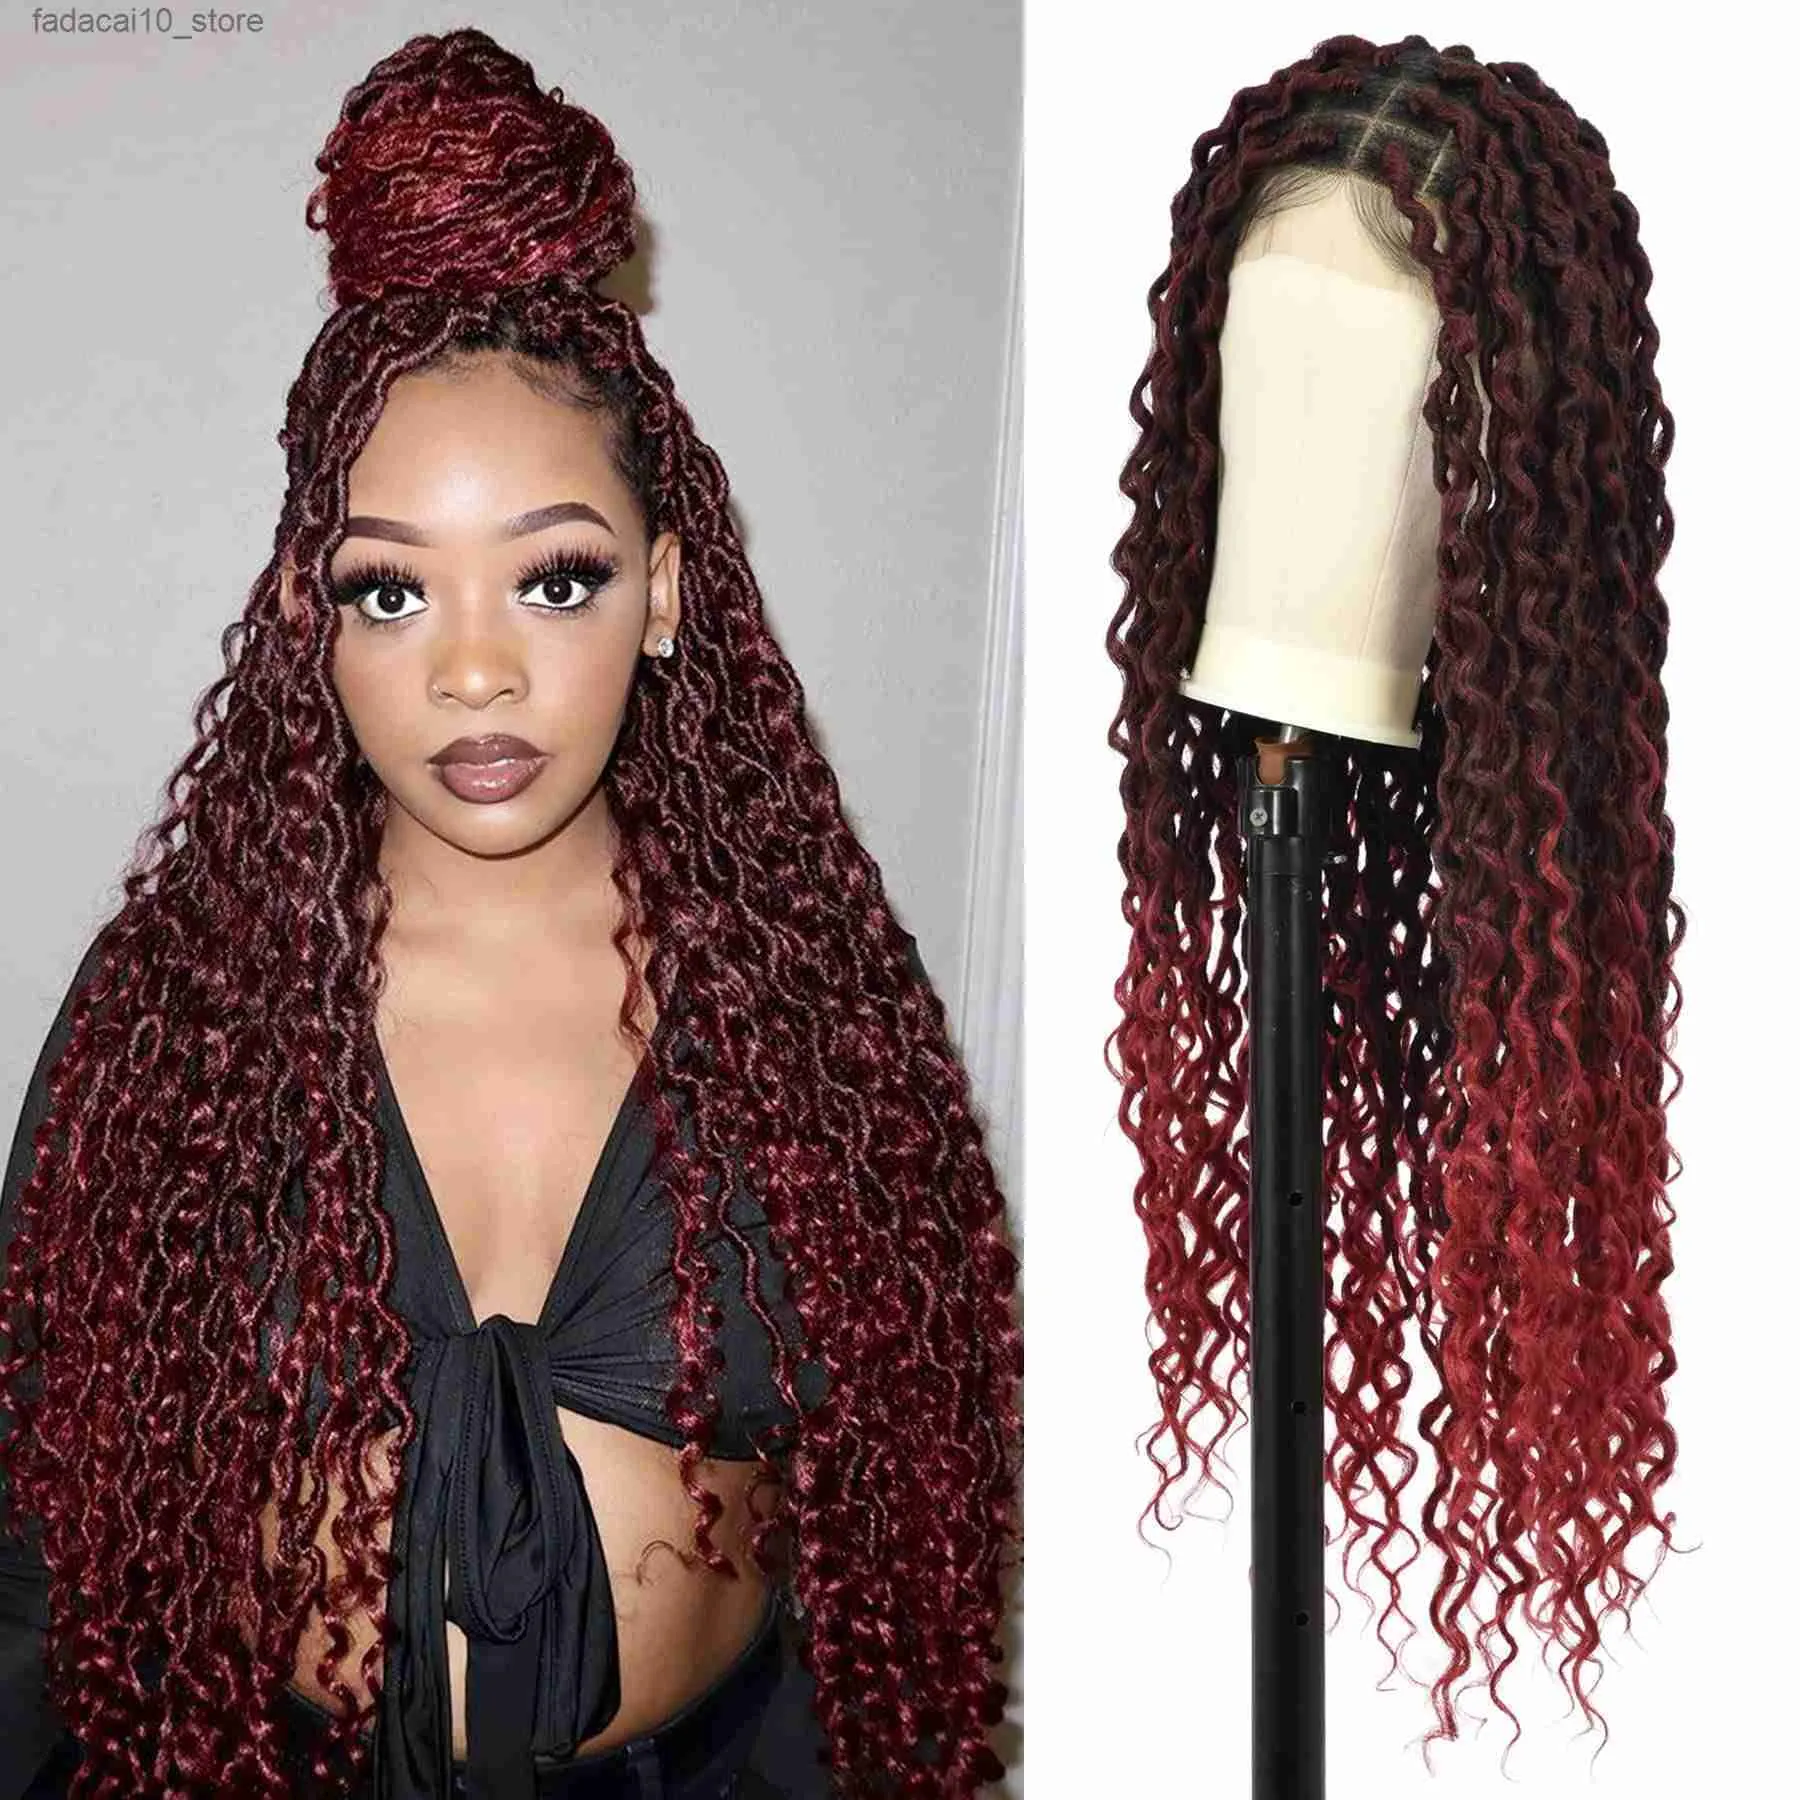 Kalyss 24 Lace Front Square Knotless Box Braided Wigs with Curly